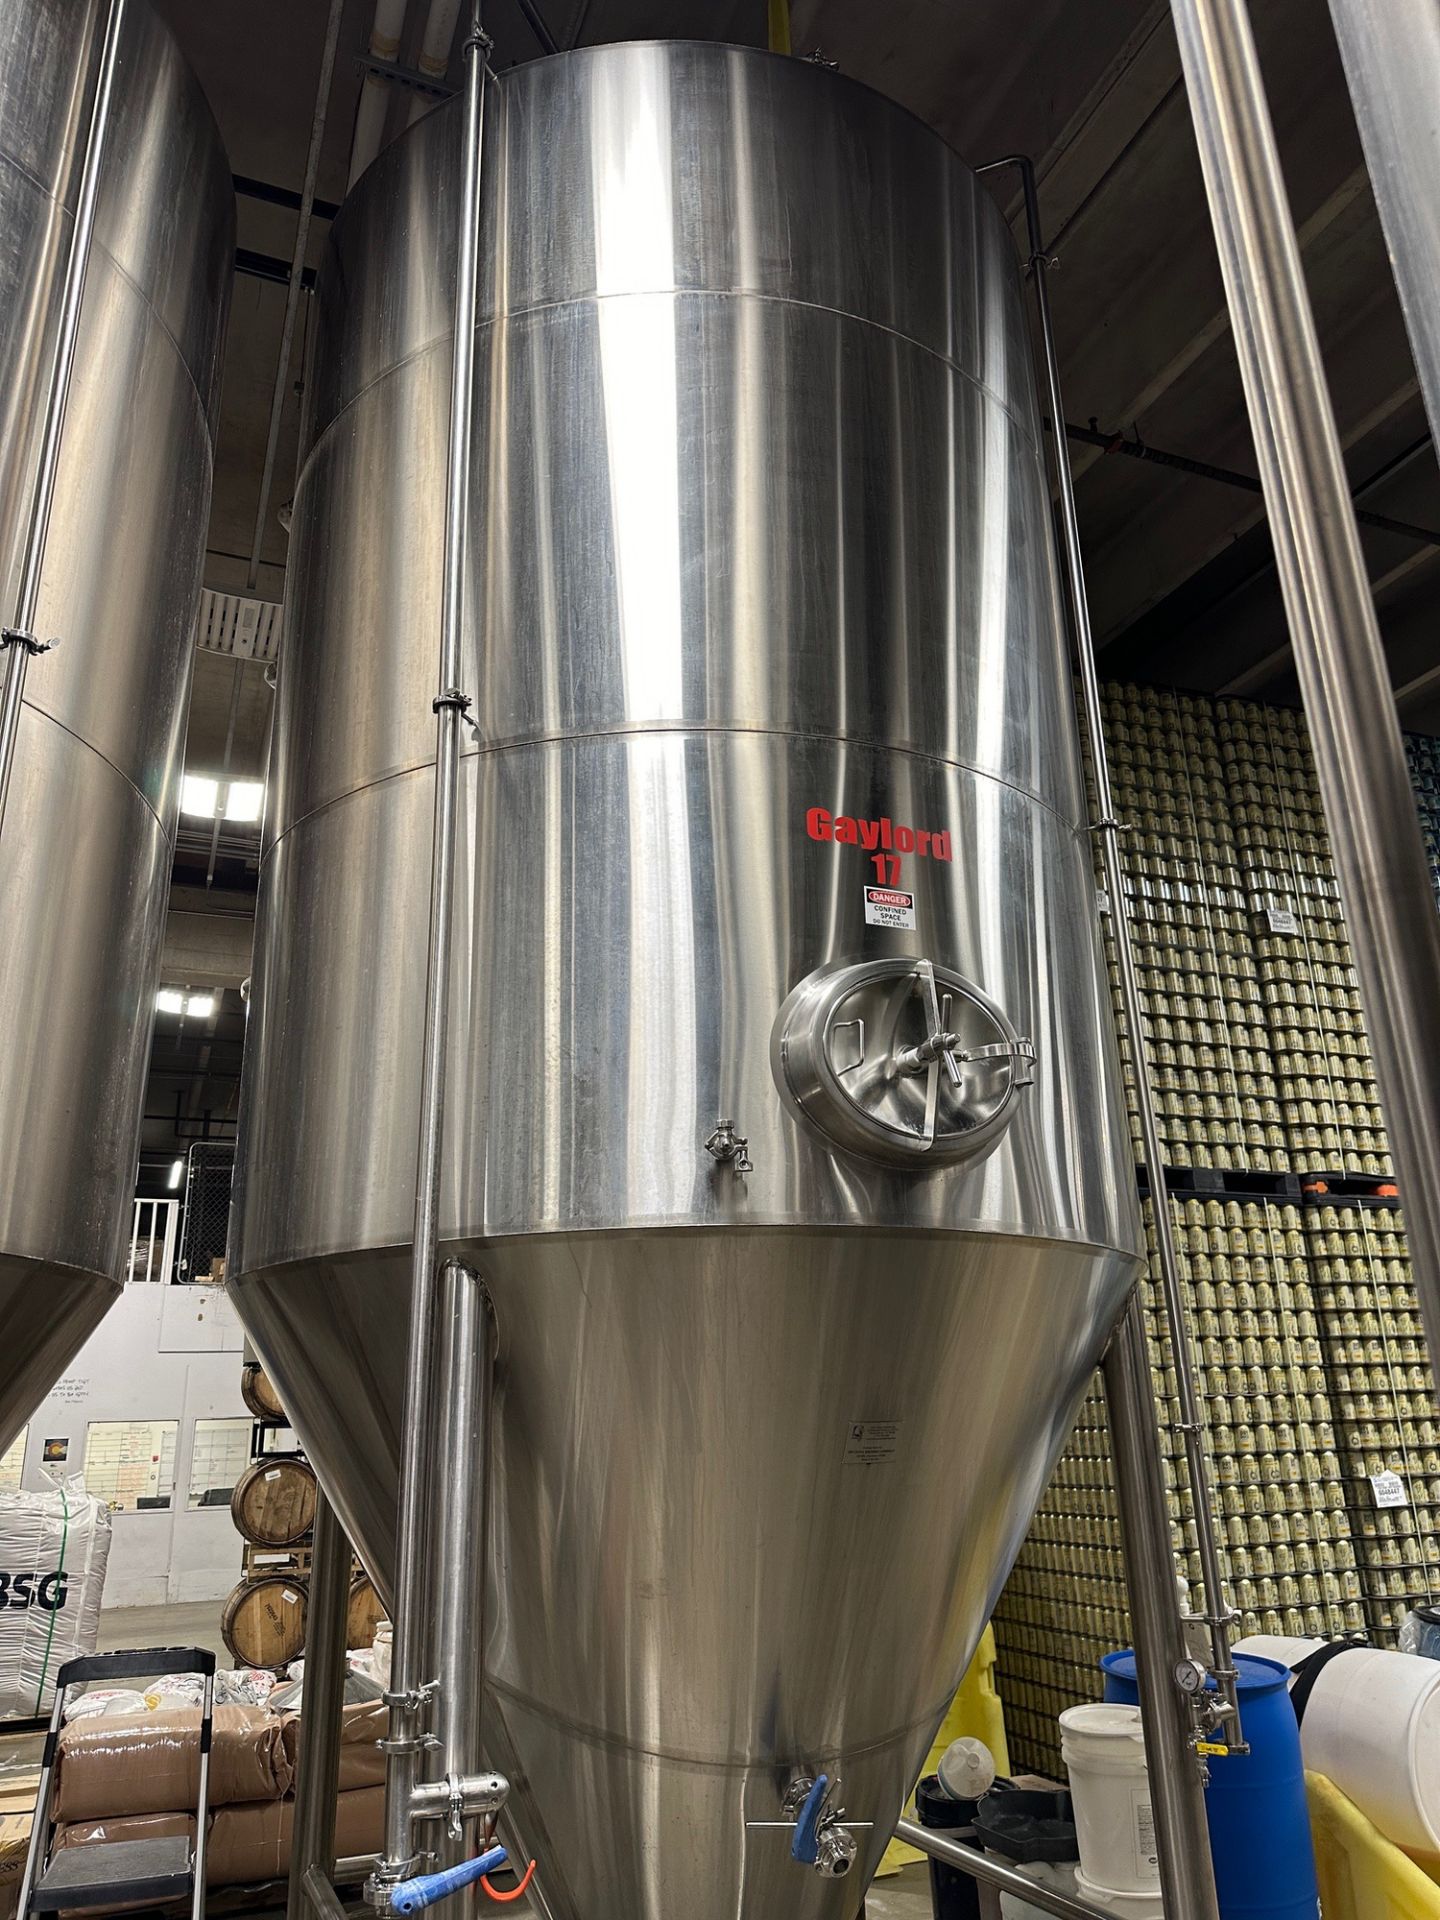 Silver State Stainless 120 BBL Stainless Steel Fermentation Tank - Cone Bottom, Gly | Rig Fee $2150